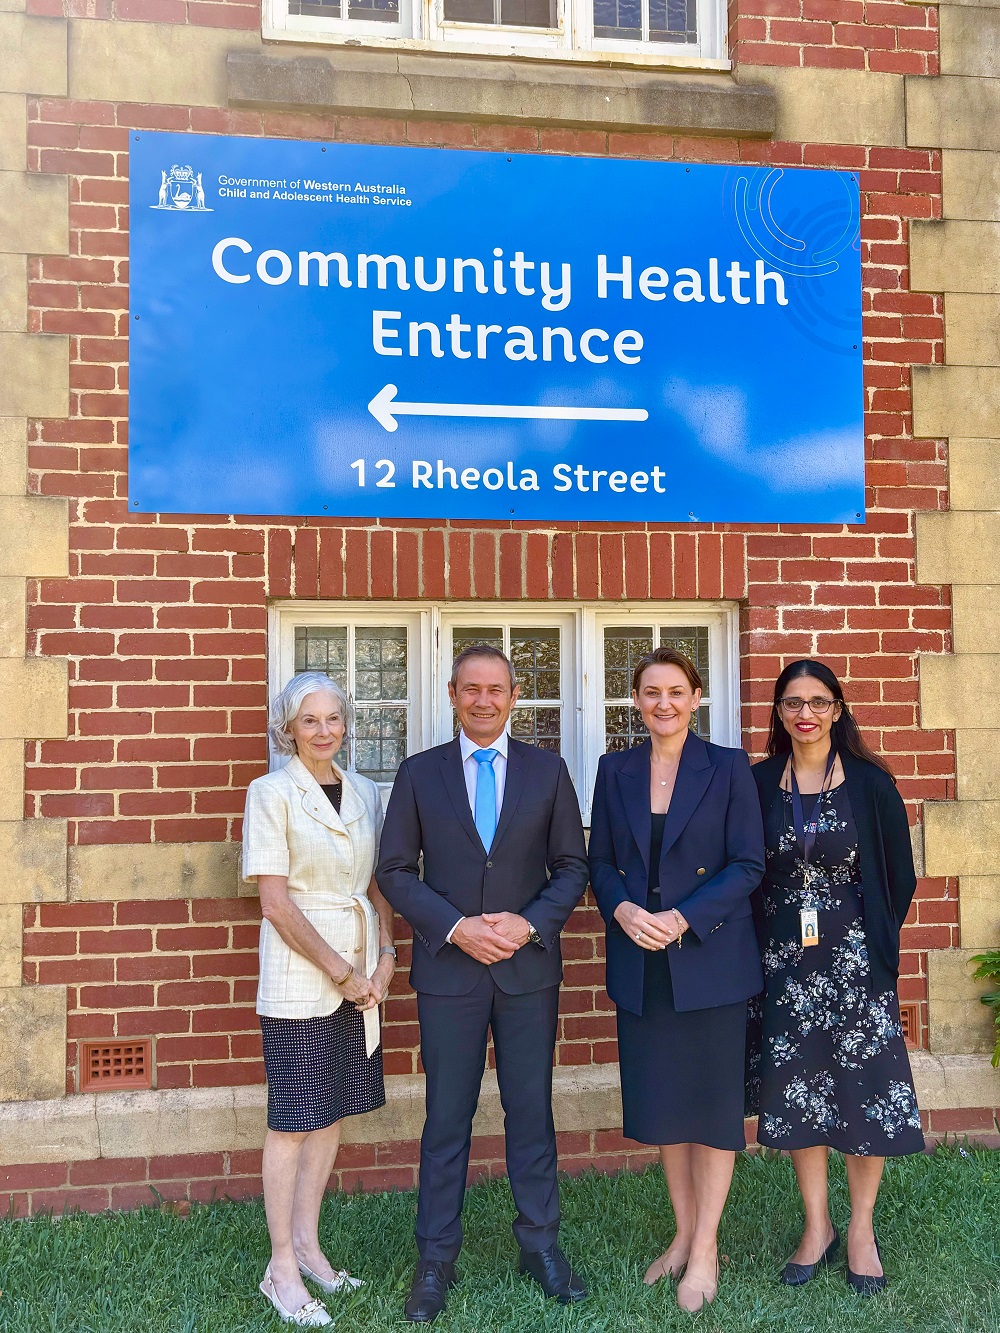 Dr Rosanna Capolingua AM, Board Chair – Child and Adolescent Health Service, Premier – Hon Roger Cook MLA, Minister for Health – Hon Amber-Jade Sanderson MLA and Dr Ushma Wadia, Infectious Disease Consultant